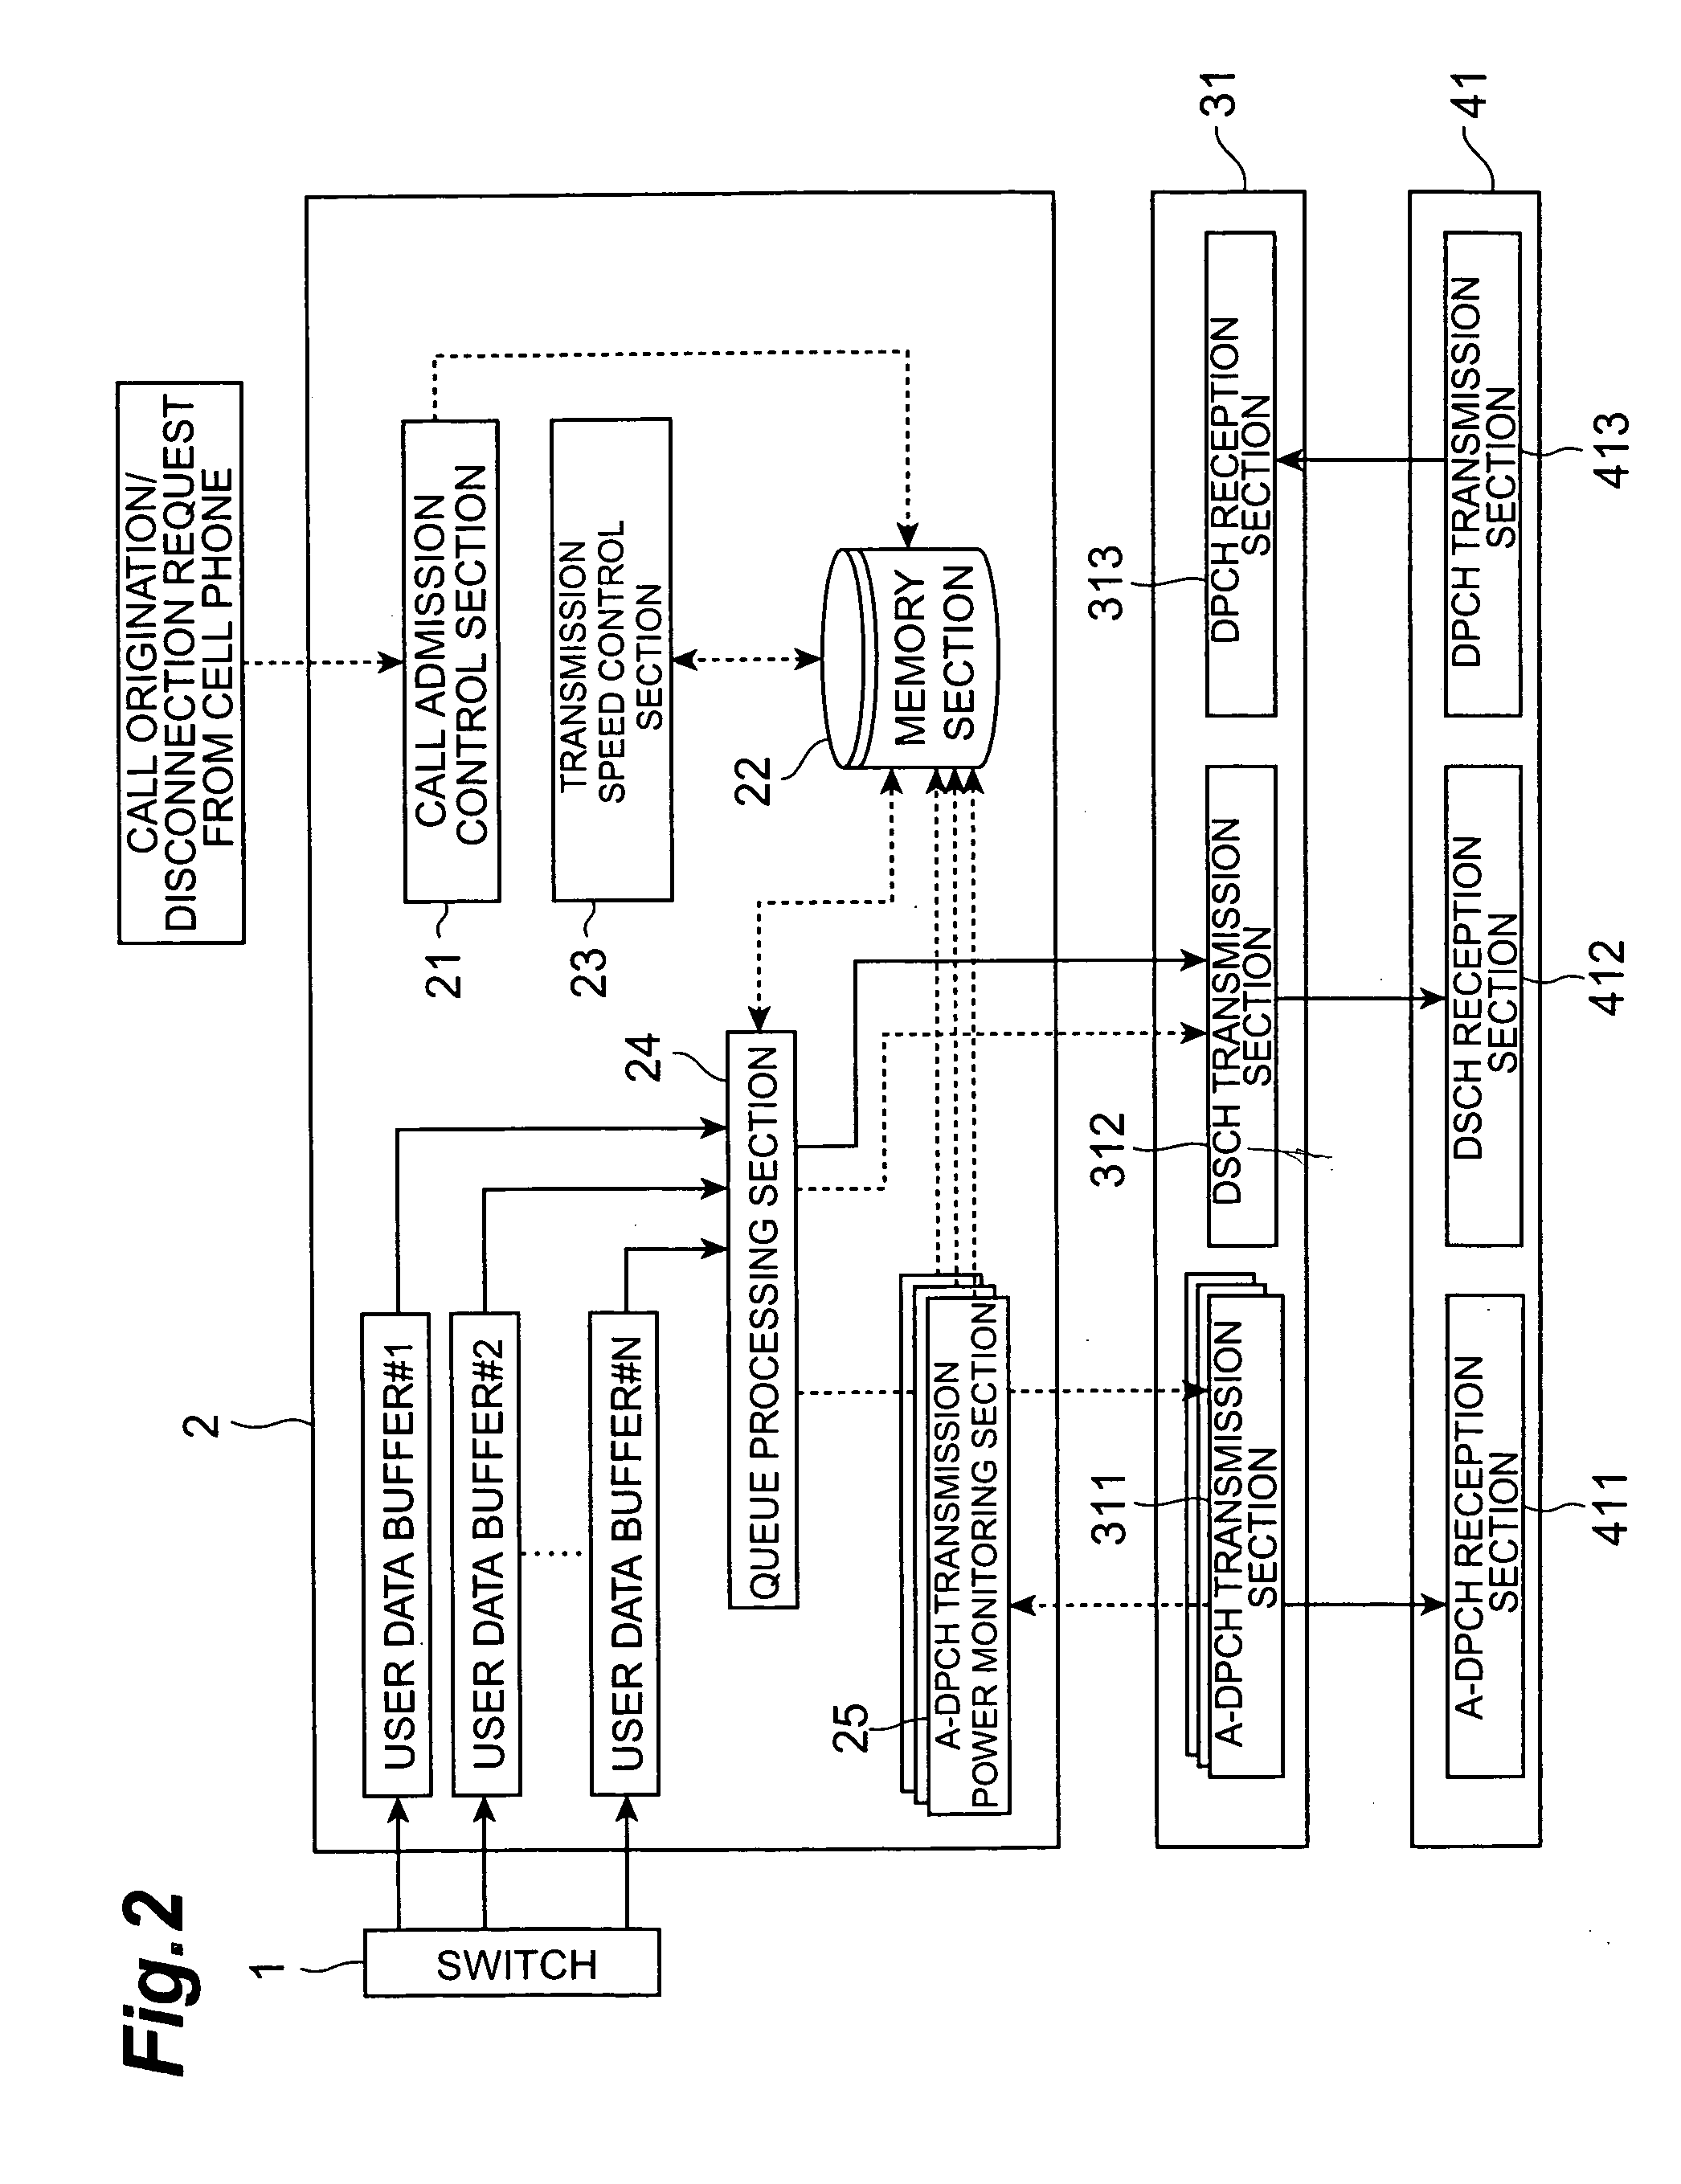 Radio control appararus, mobile communication method, mobile communication program, and mobile communication system